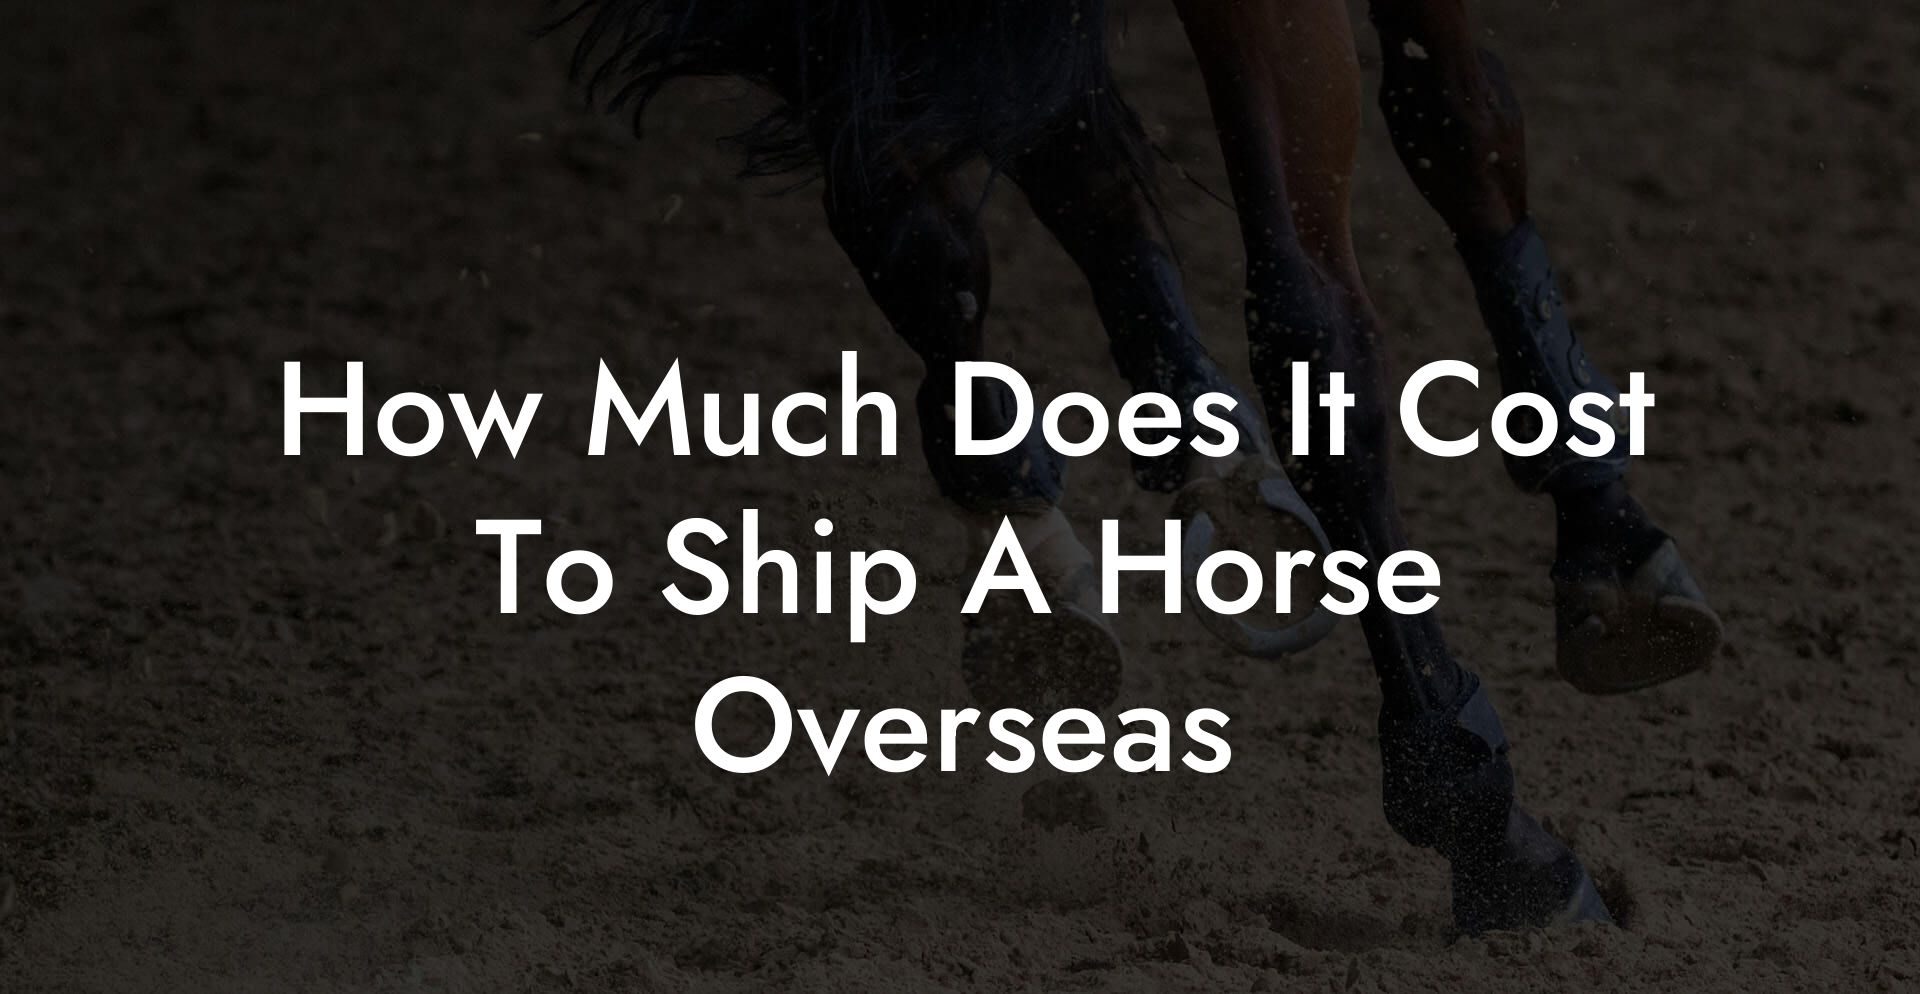 How Much Does It Cost To Ship A Horse Overseas